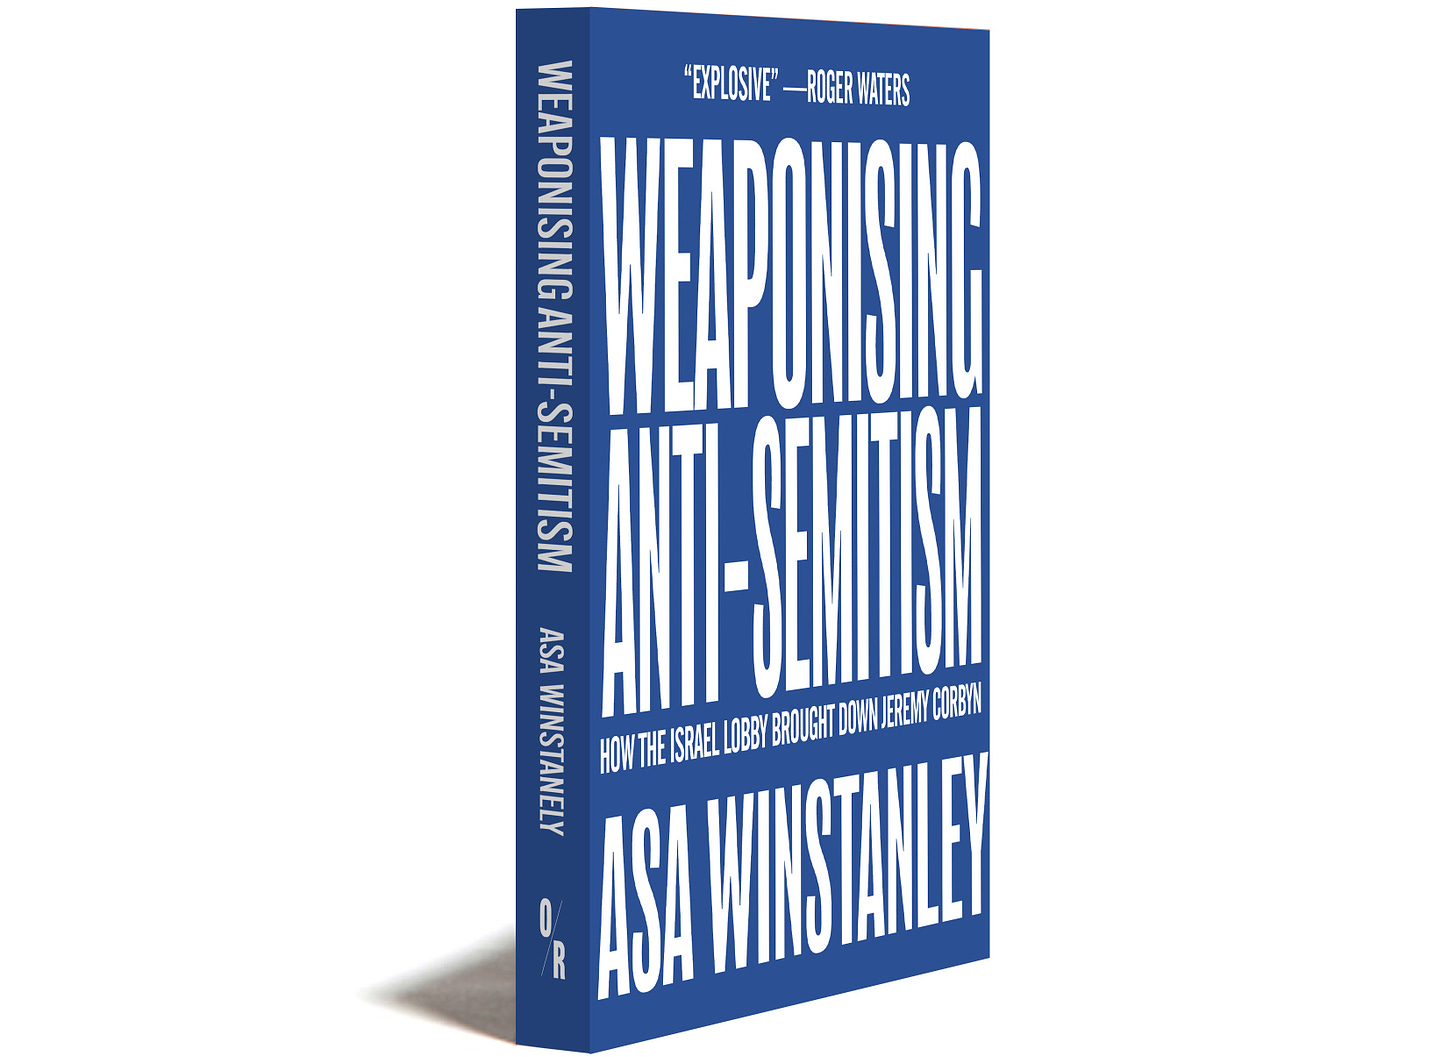 Book cover: "Weaponising Anti-Semitism: How the Israel lobby brought down Jeremy Corbyn". By Asa Winstanley. "Explosive" -- Roger Waters